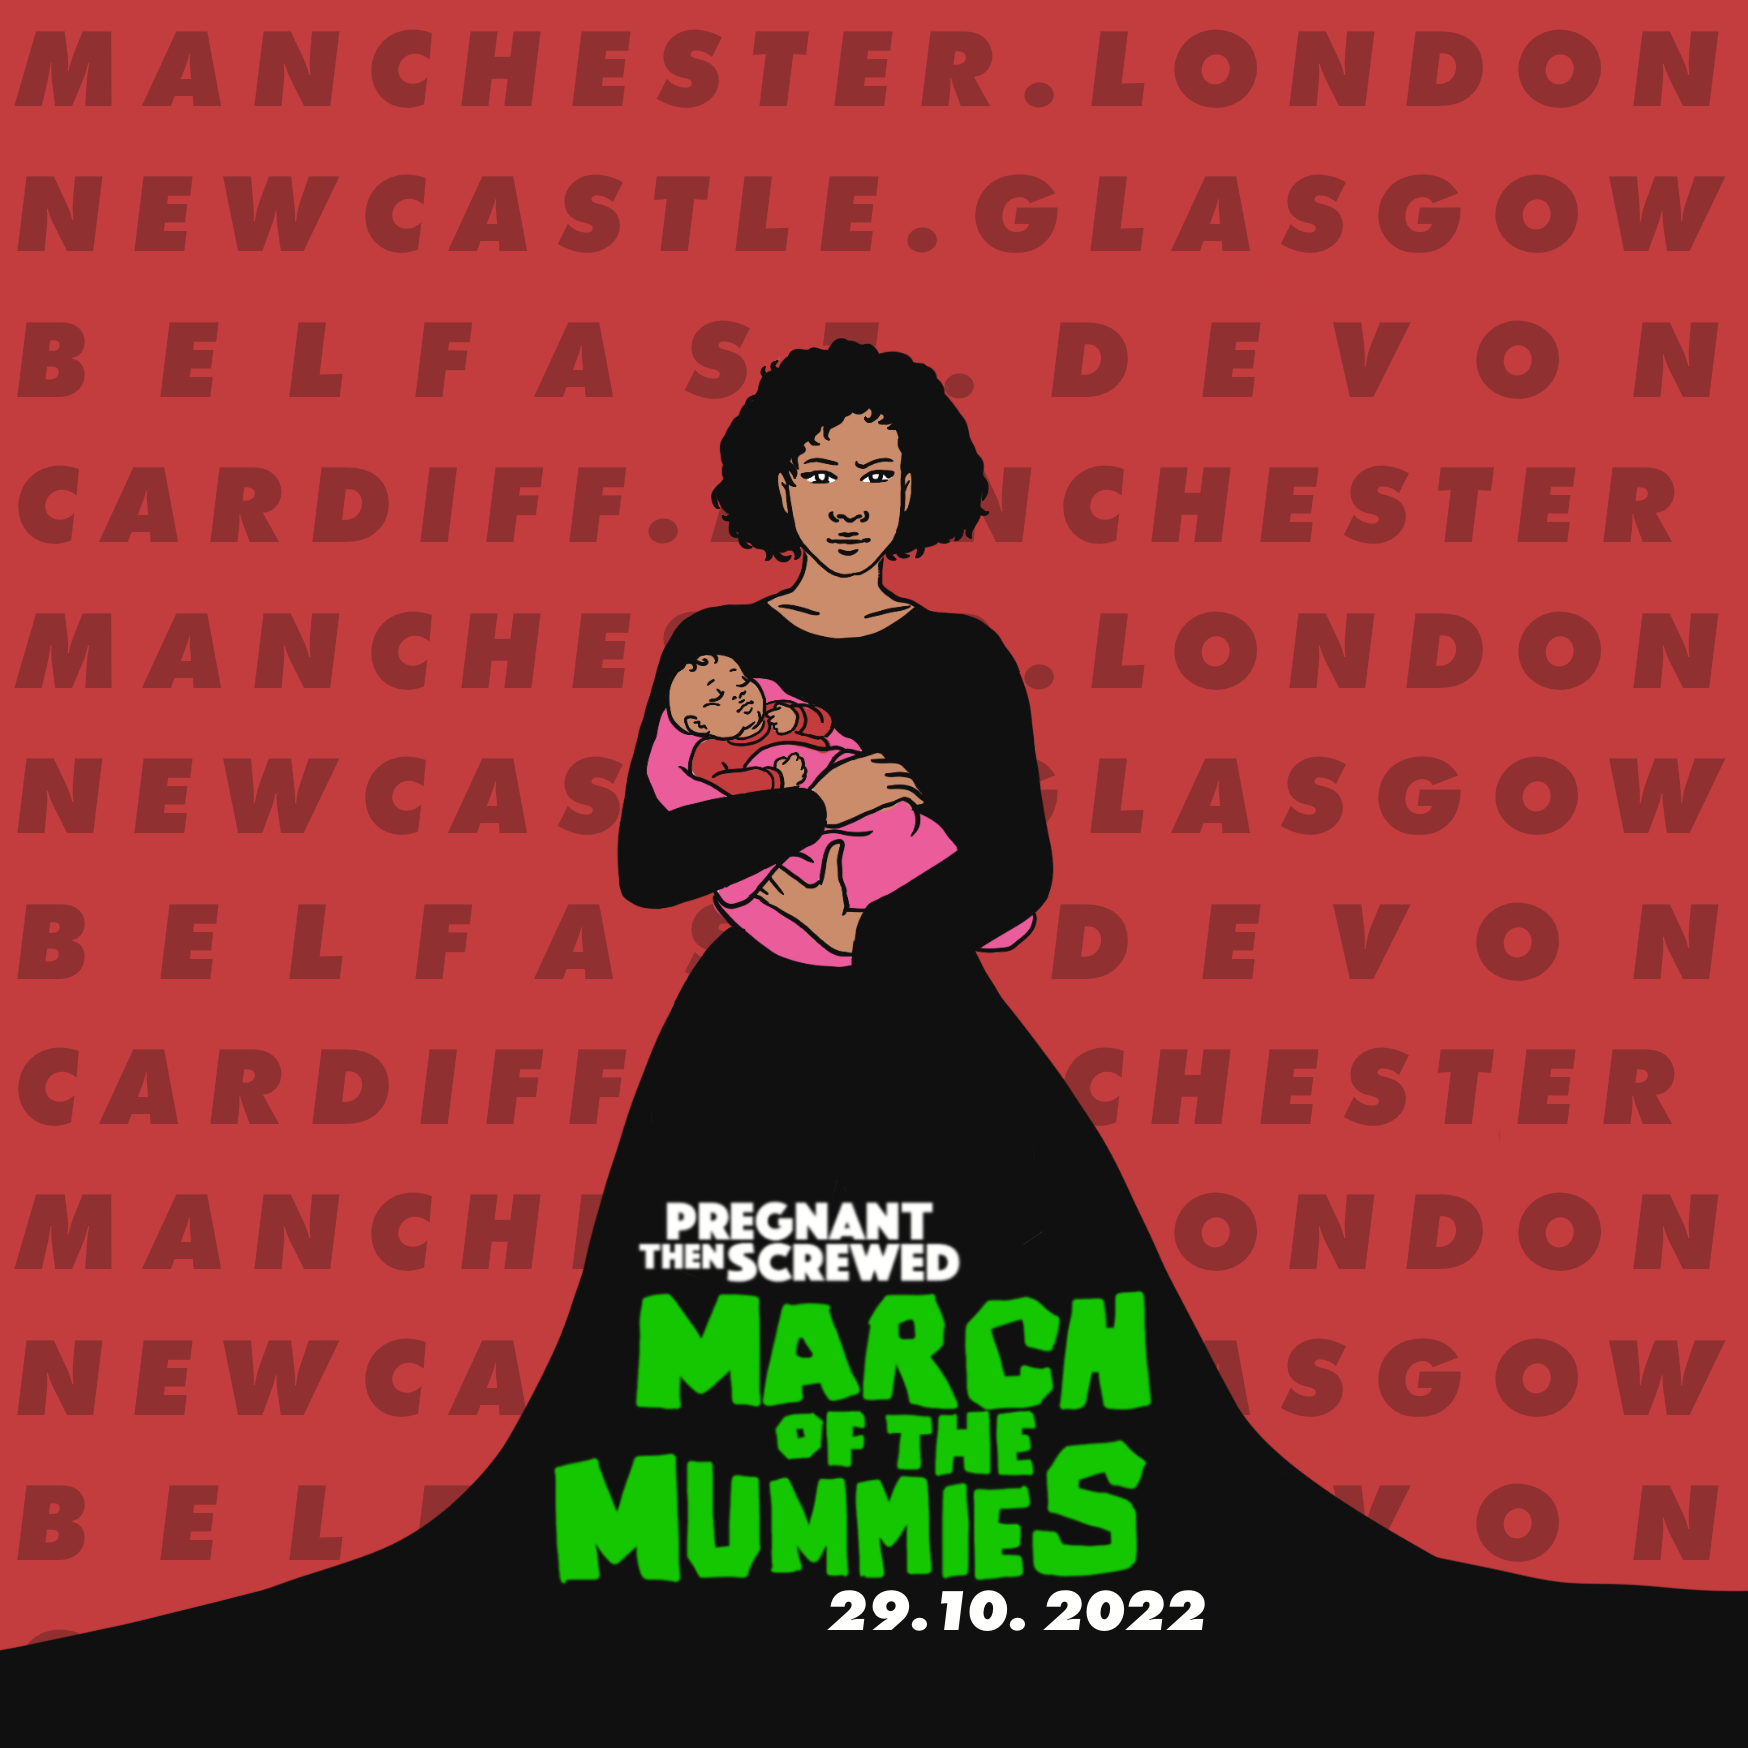 Alt text: March Of The Mummies 2022 logo, woman in black dress holding her baby